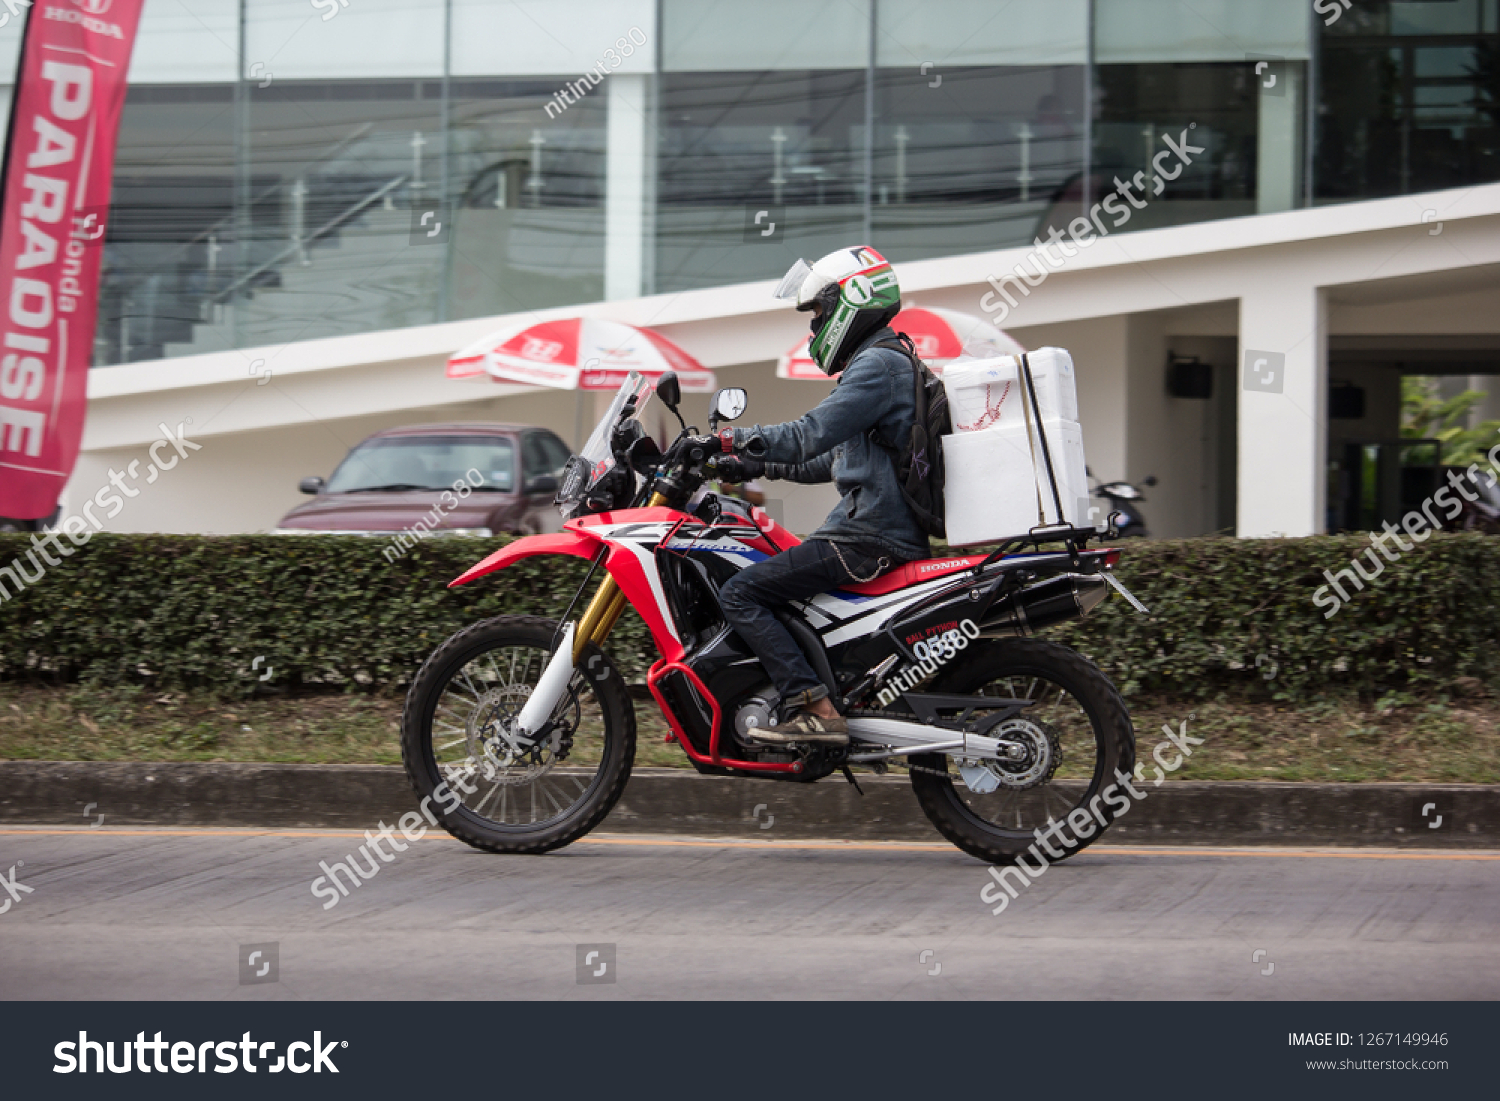 Chiangmai, Thailand - December 18 2018: Private Racing Honda CRF250 Motorcycle. Photo at road no.121 about 8 km from downtown Chiangmai, thailand. #1267149946